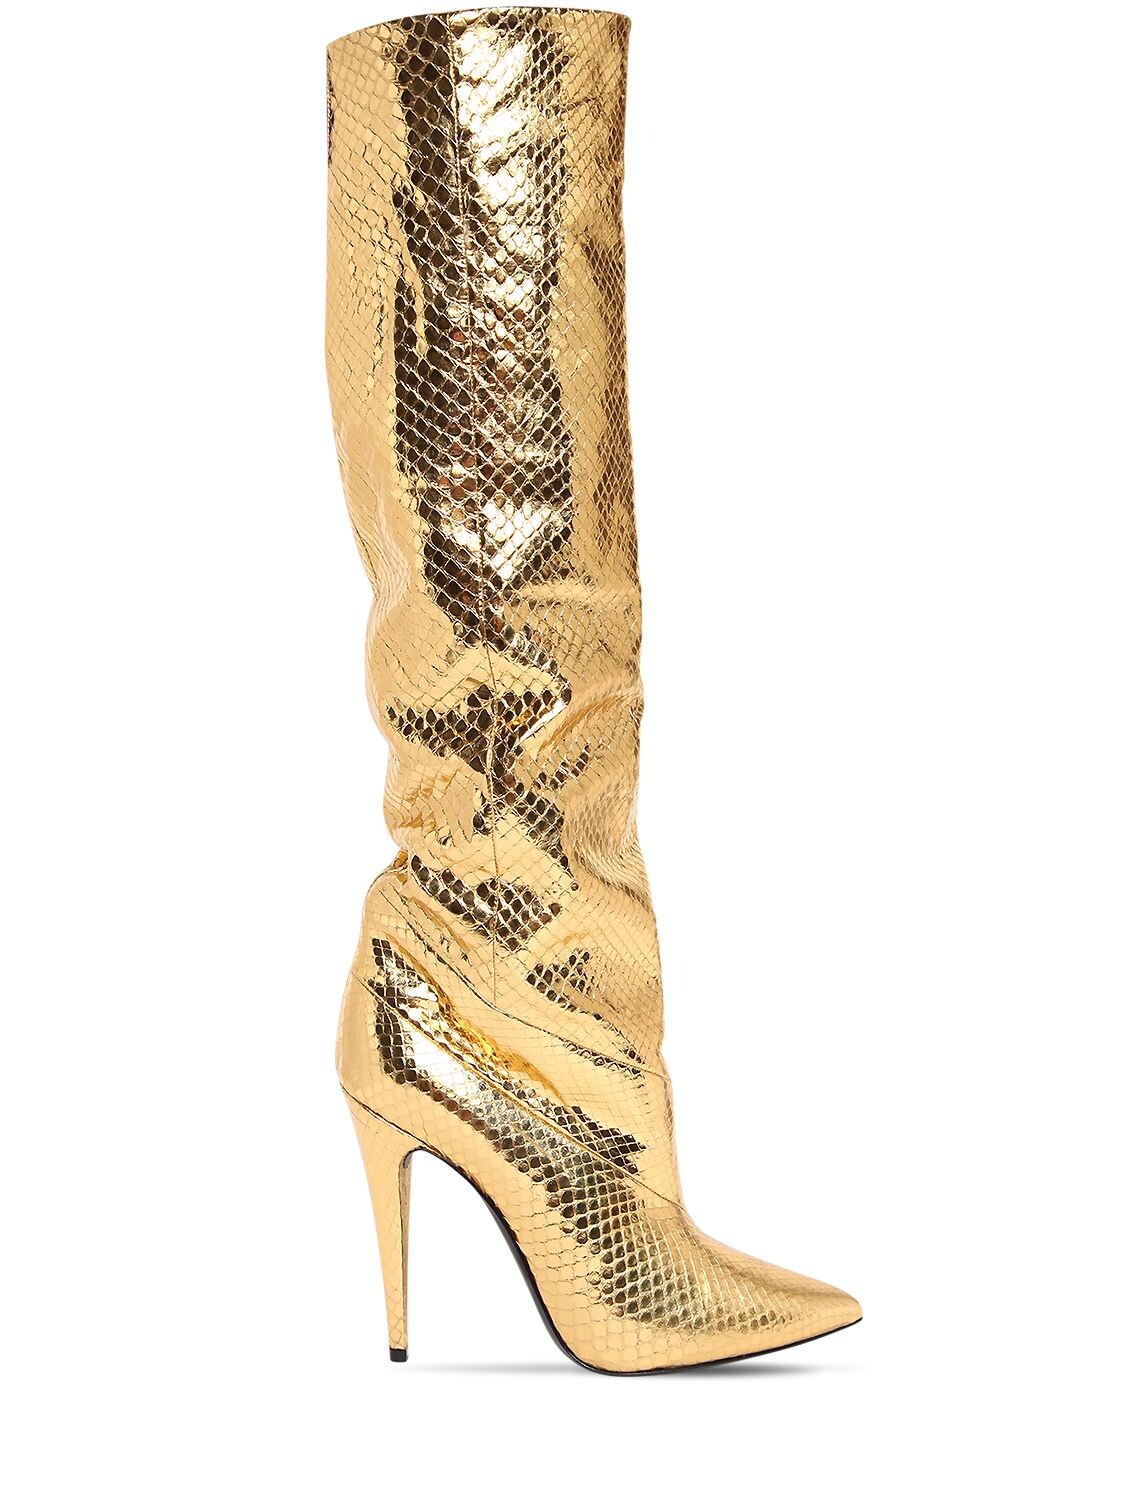 Saint Laurent 110mm Abbey Metallic Python Tall Boots In Gold